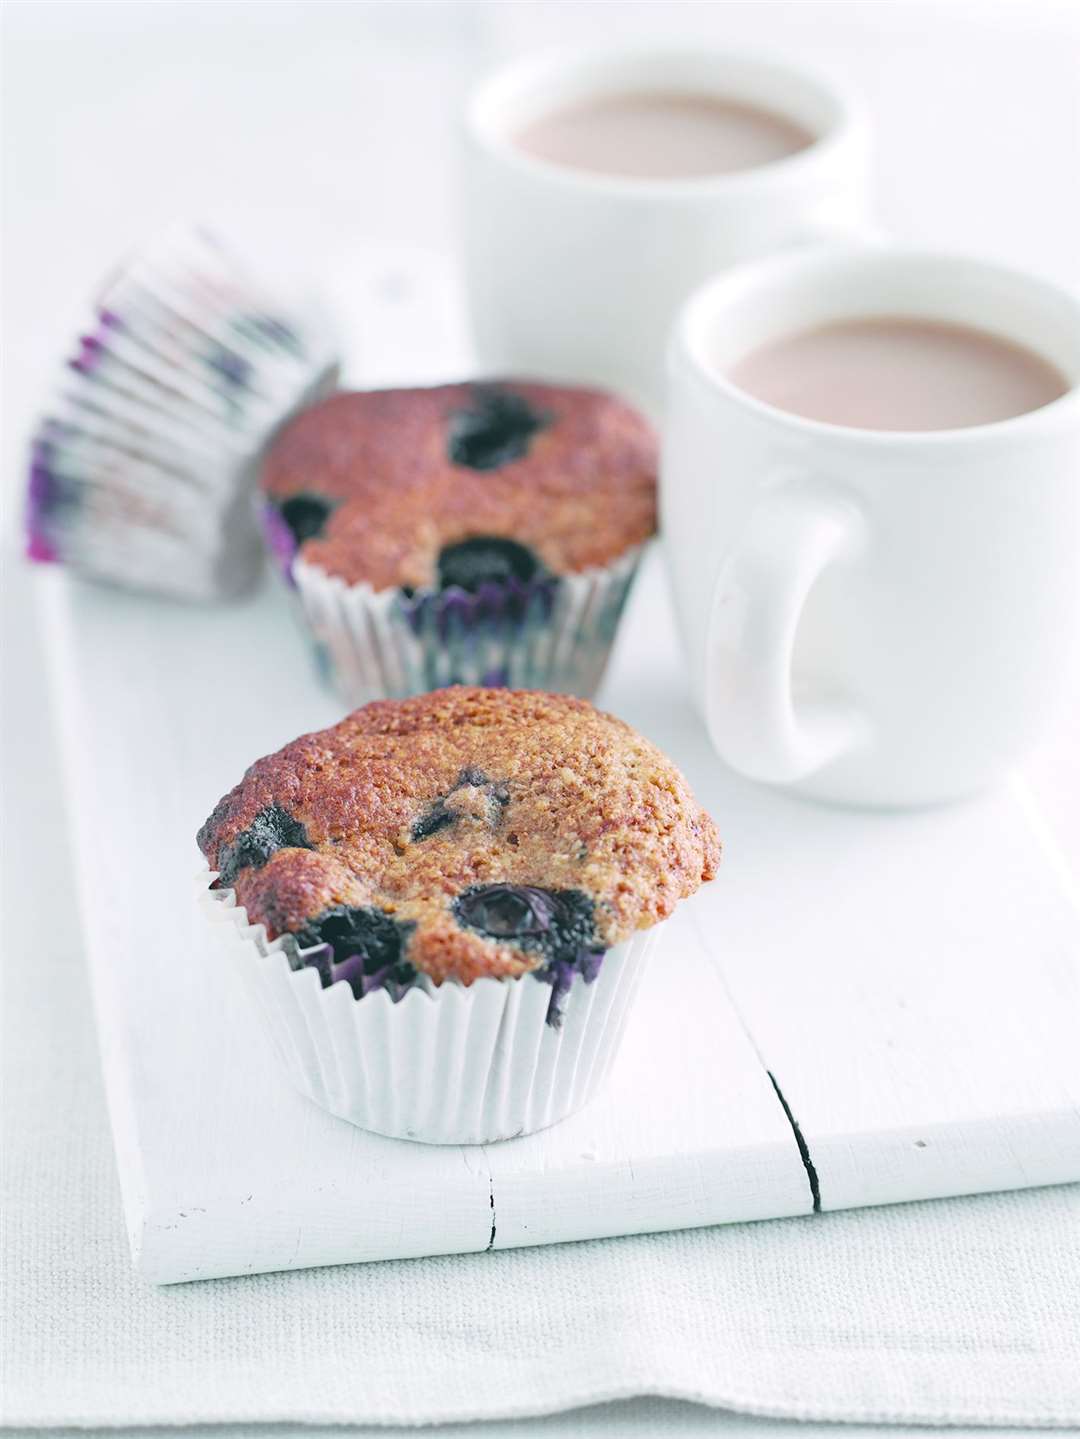 Bran and blueberry muffins.